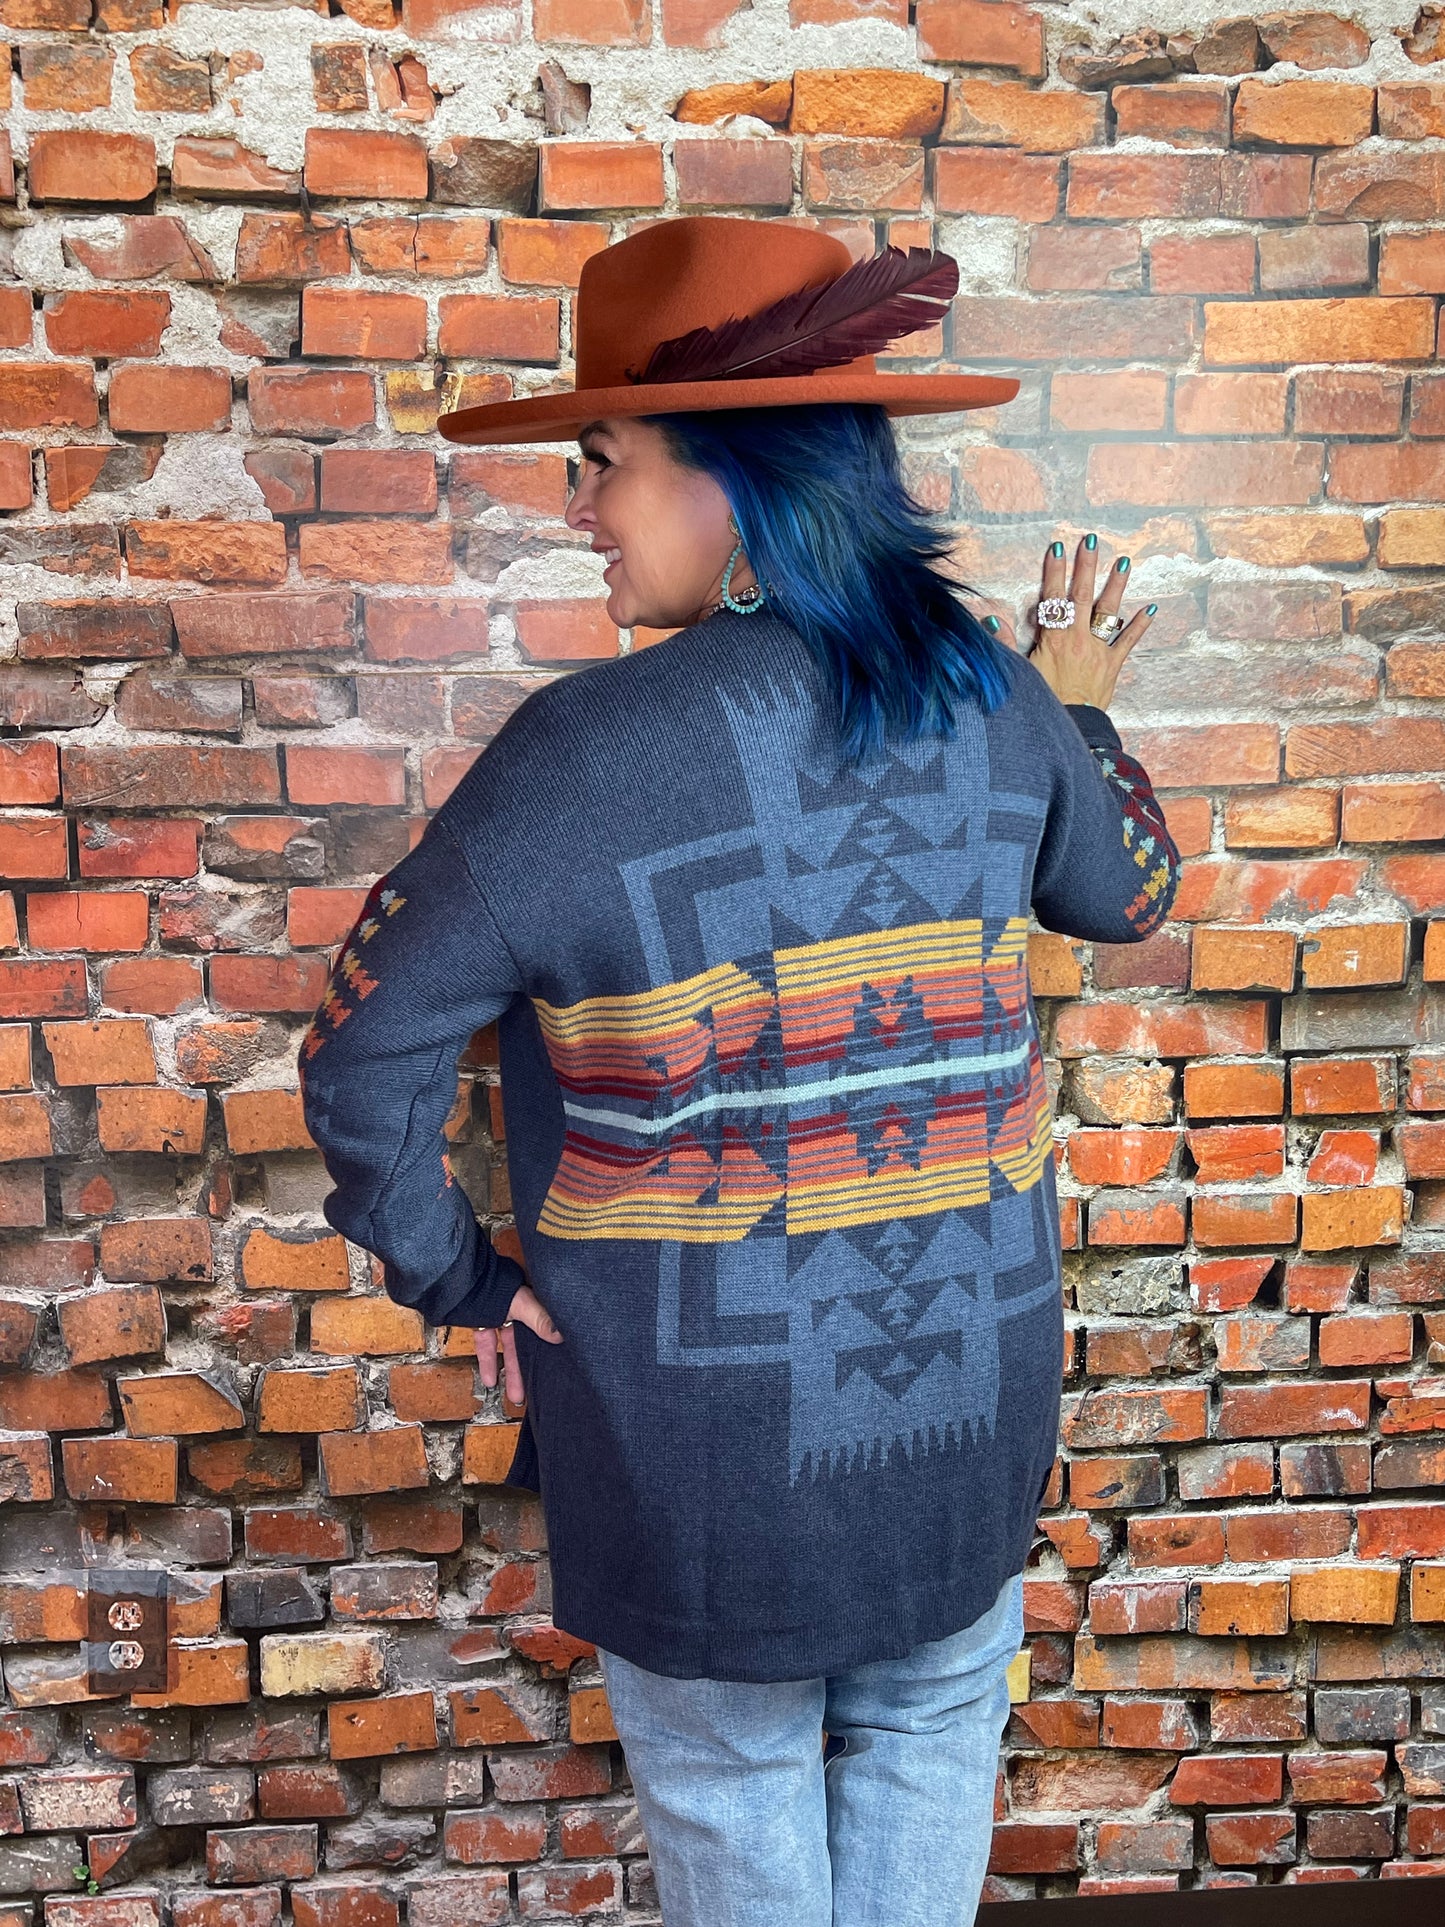 Graphic Open Front Cardigan